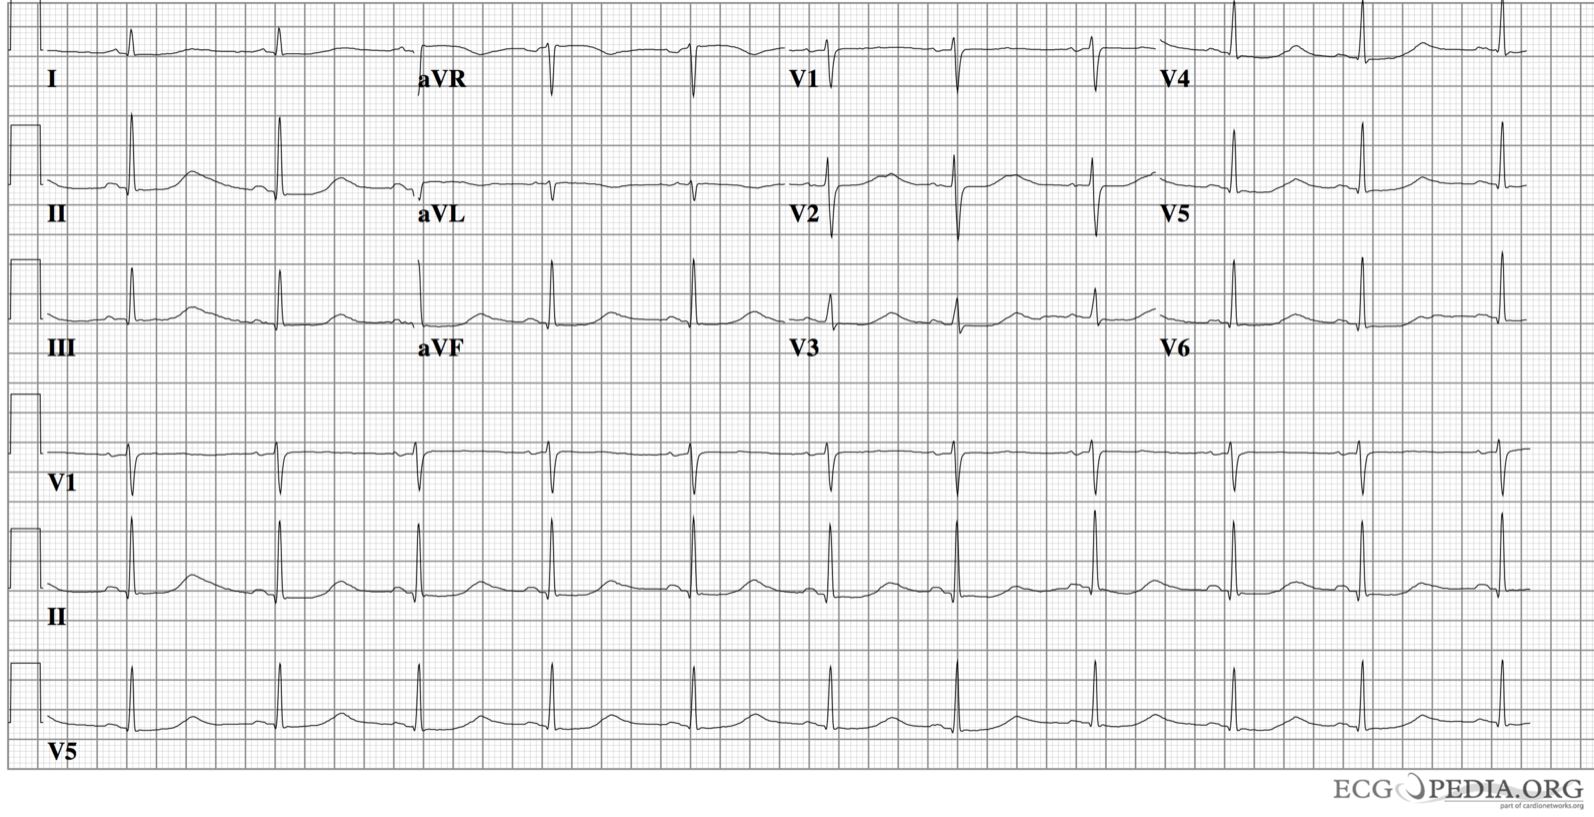 Prolonged QT Interval seen in Long QT Syndrome